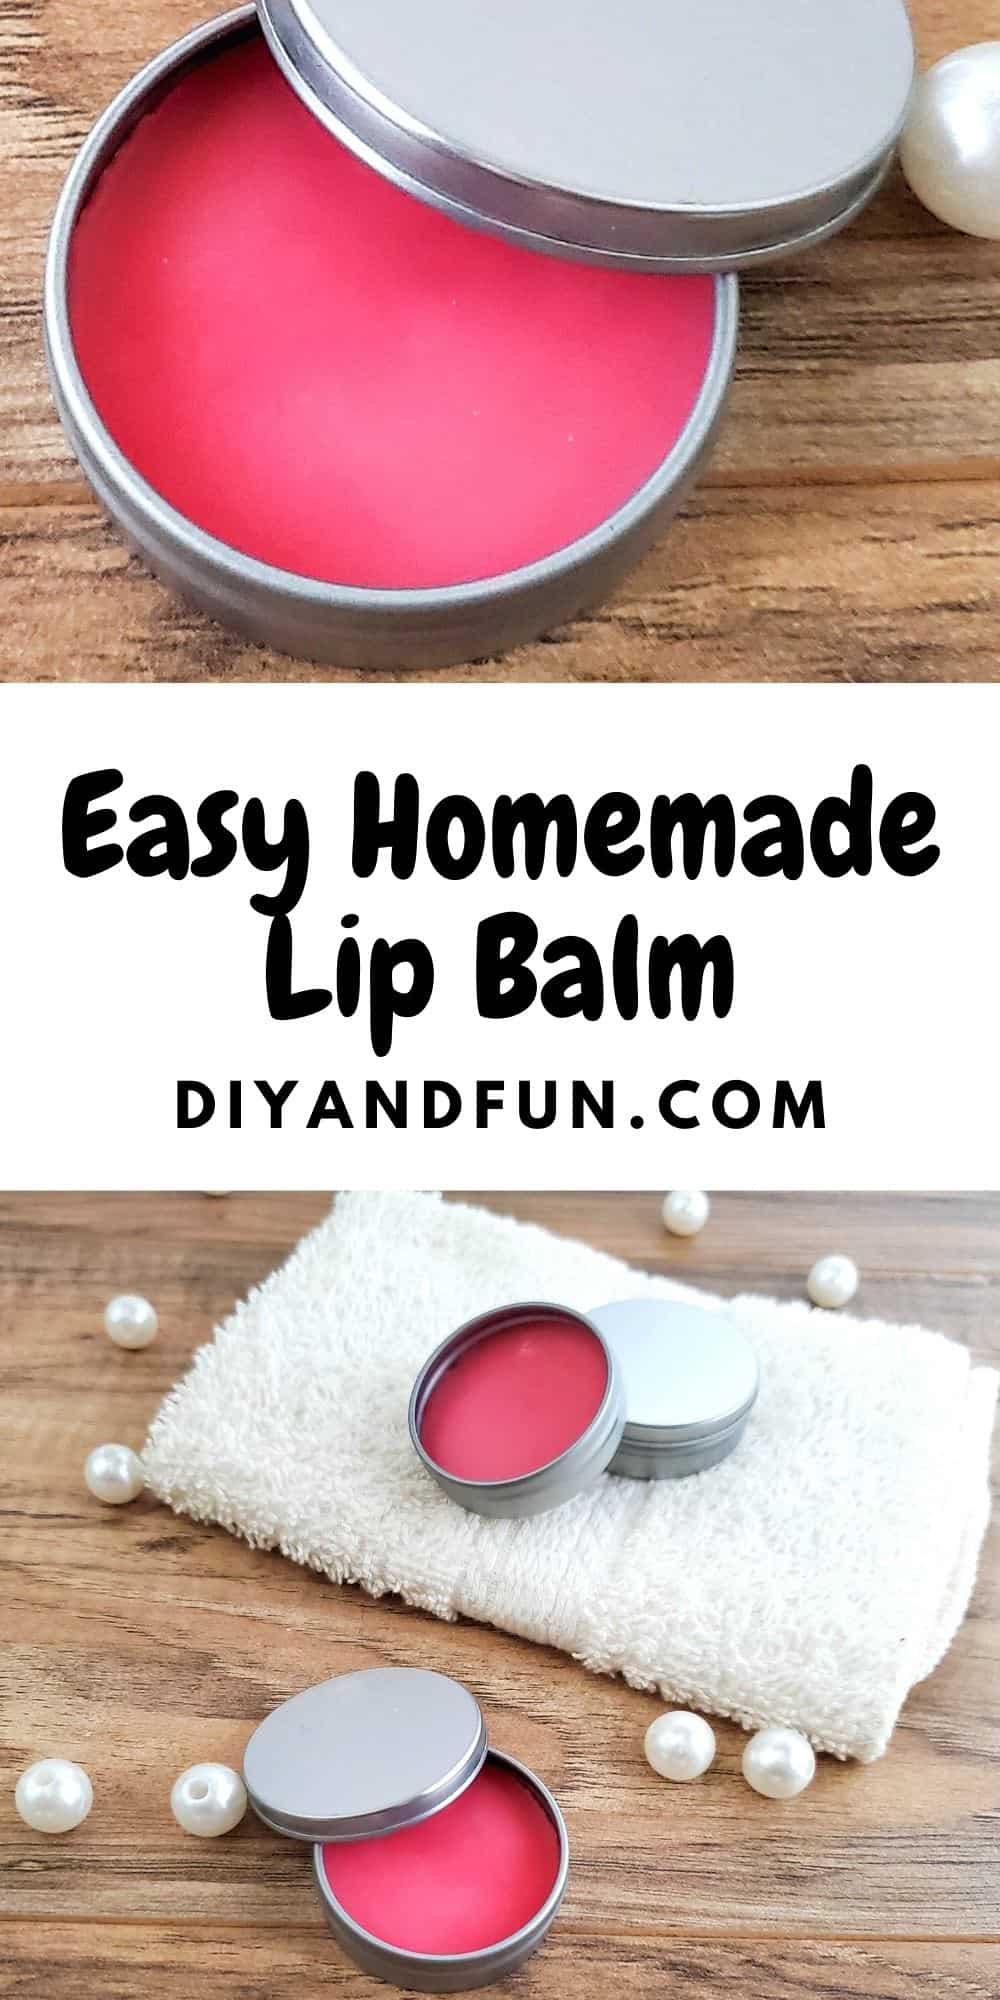 Easy Homemade Lip Balm, a simple four ingredient do it yourself project for making natural peppermint flavored lip balm.